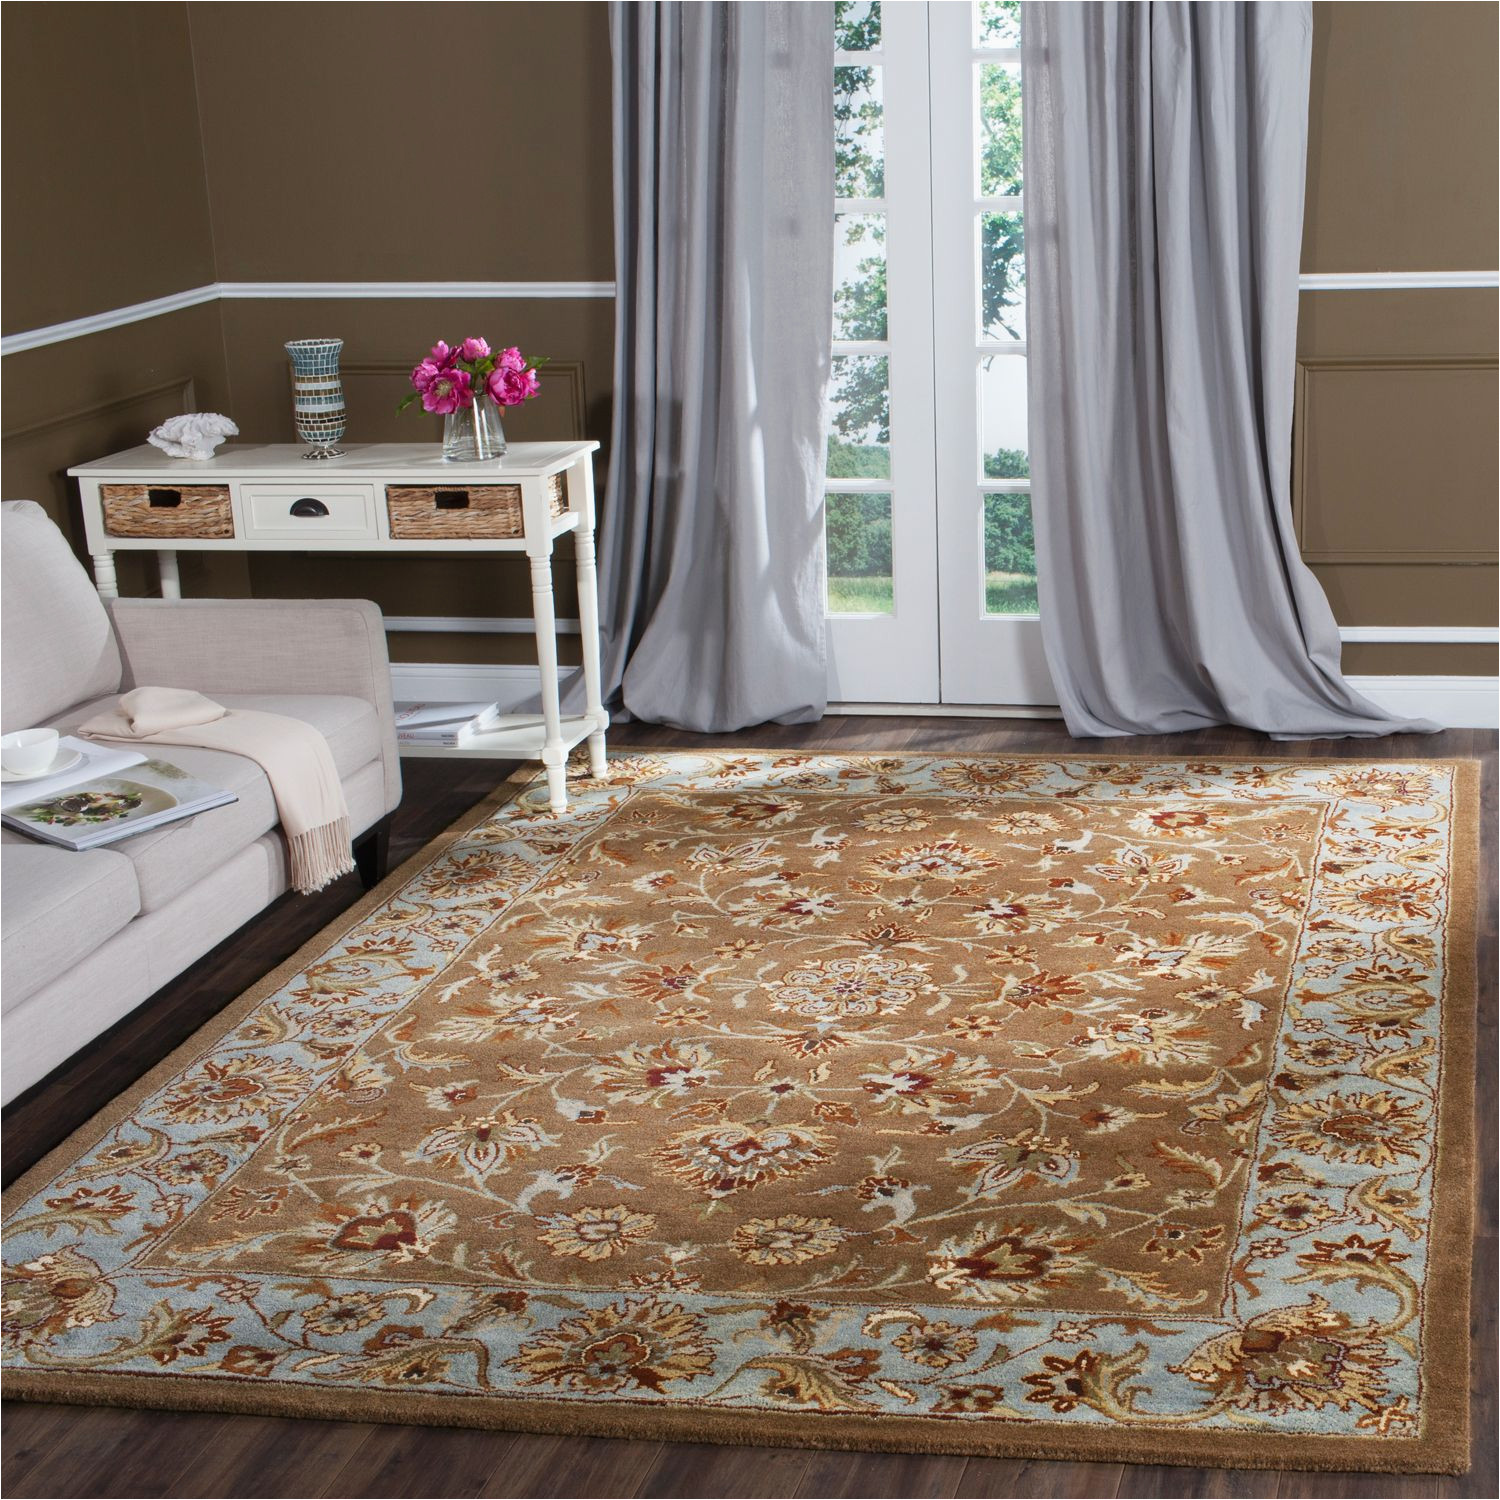 Large area Rugs at Kohls A Guide to area Rug Cleaning – Kohl’s Blog